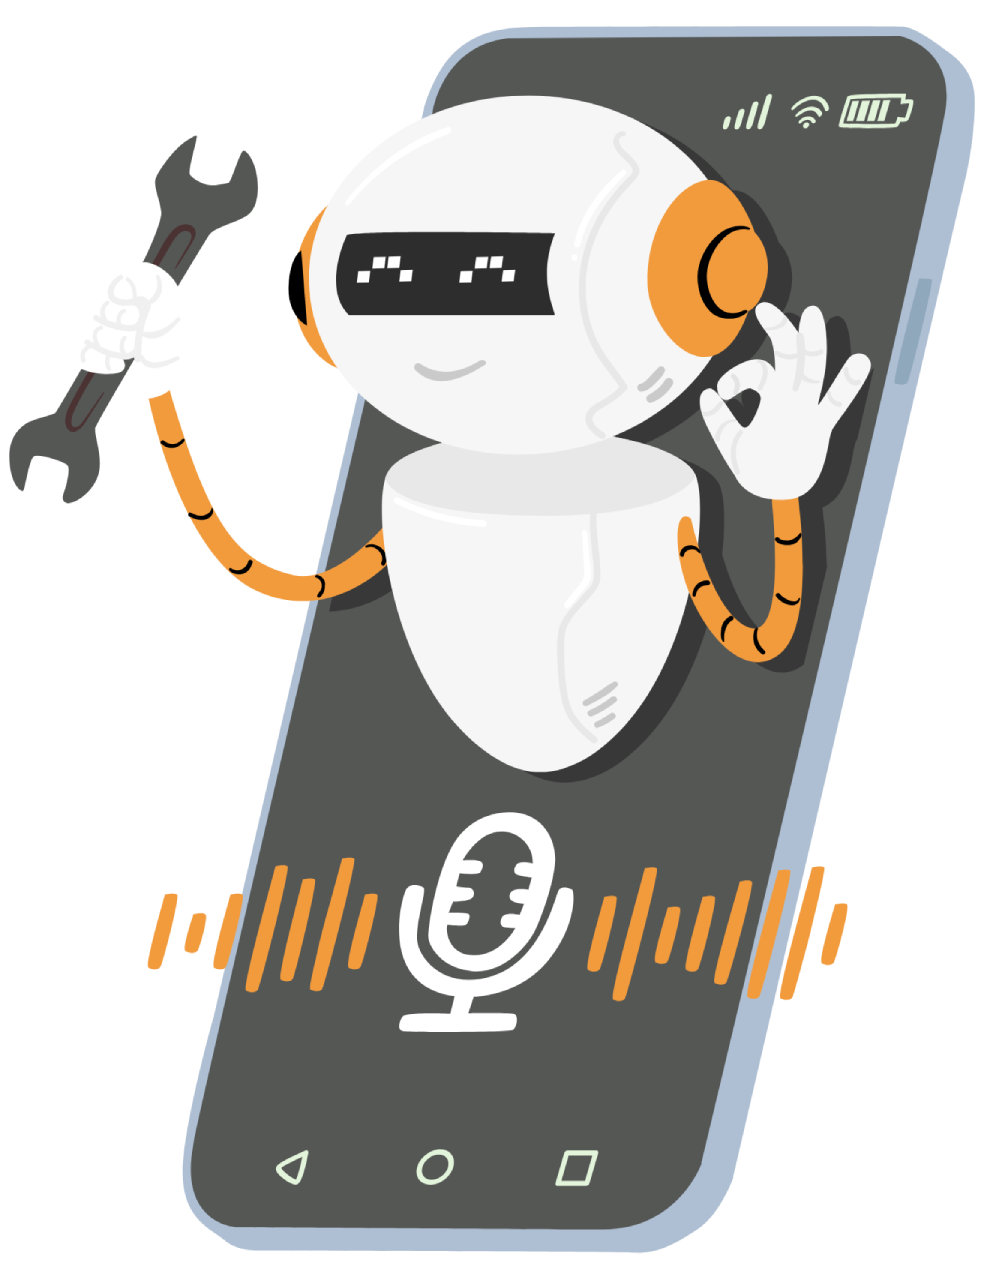 Key Features and Integrations of chatbot